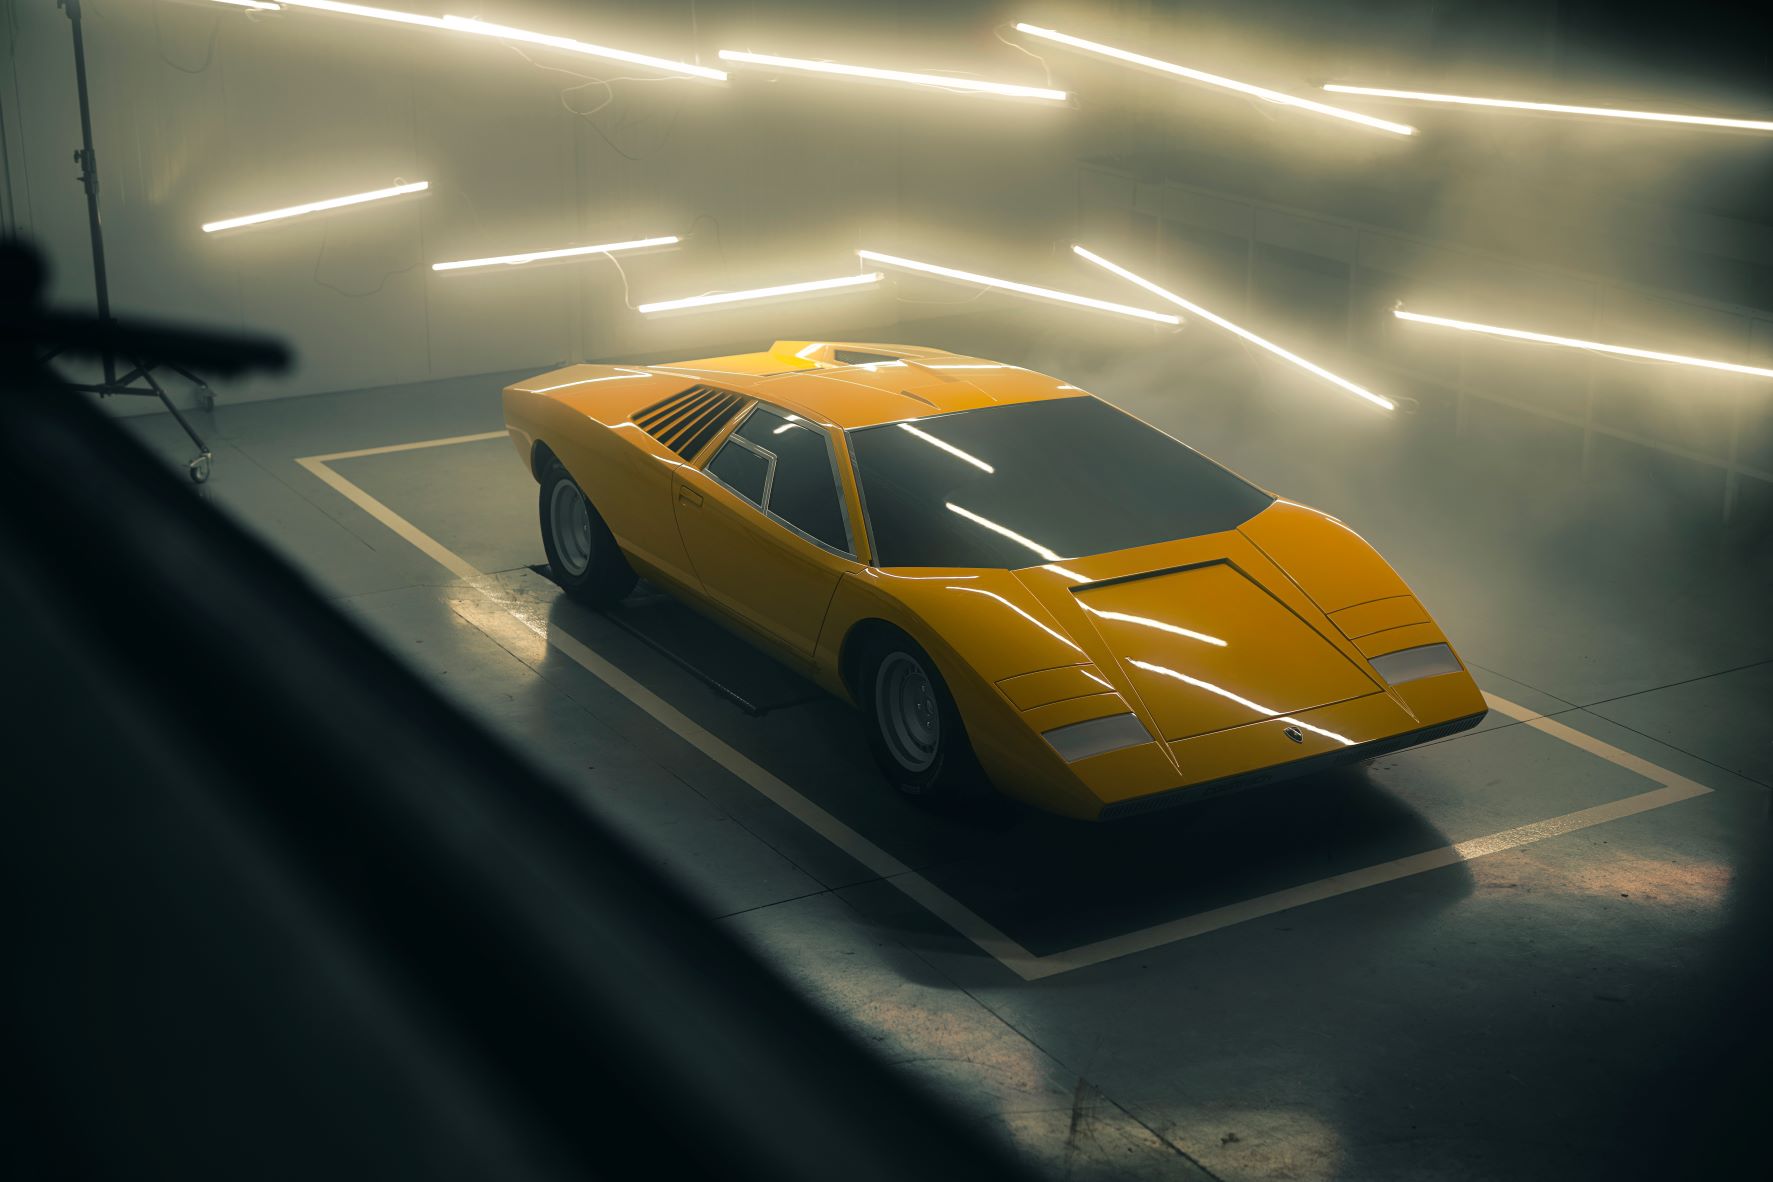 Lamborghini's recreation of the iconic Countach serial number 1